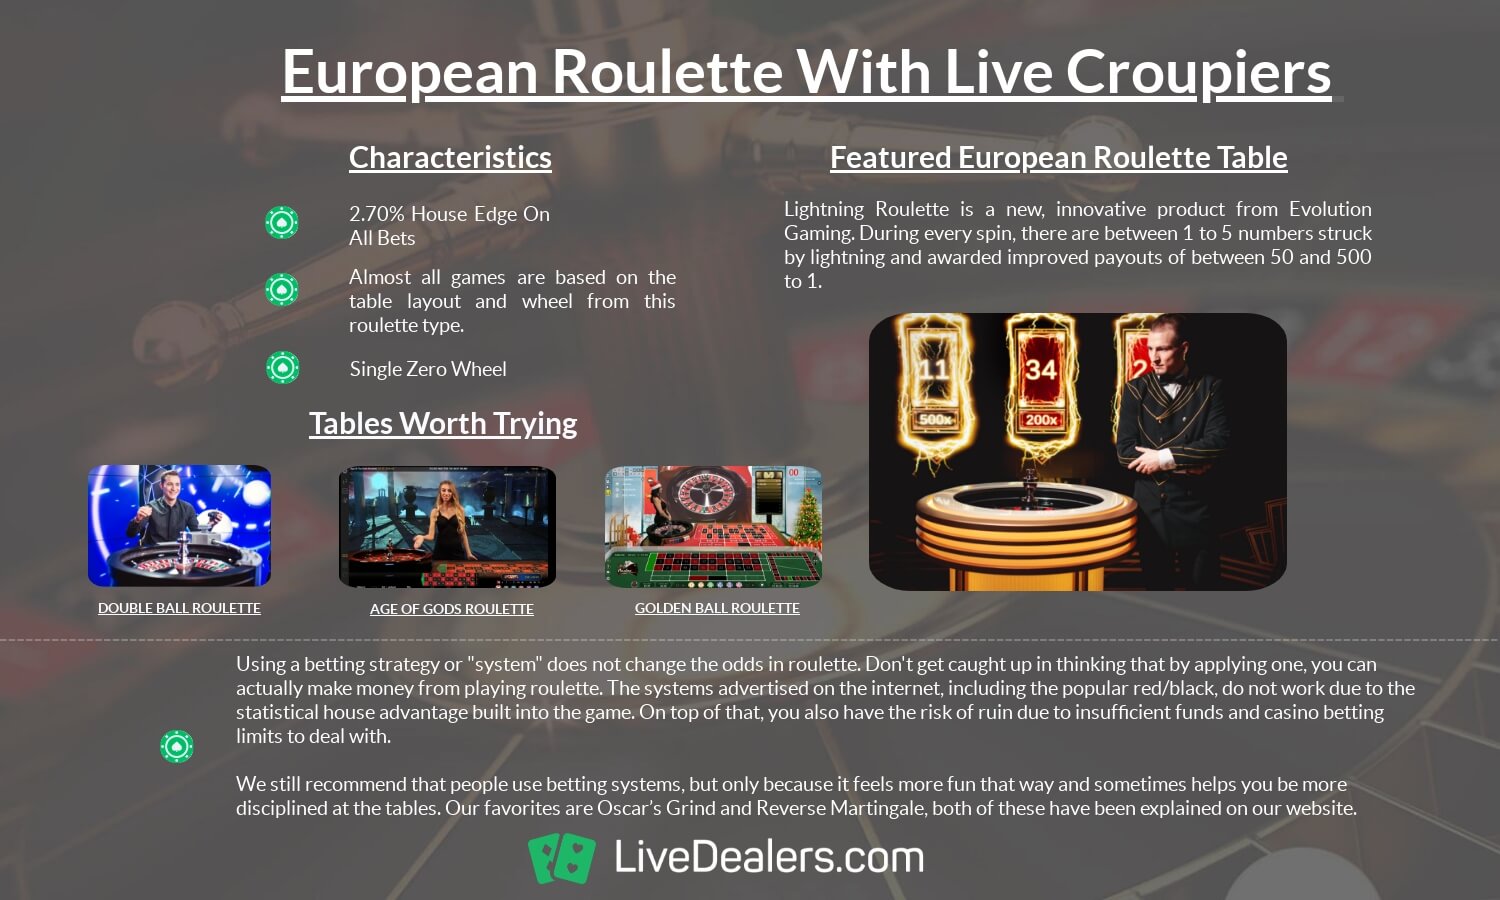 EUROPEAN ROULETTE WITH LIVE DEALERS